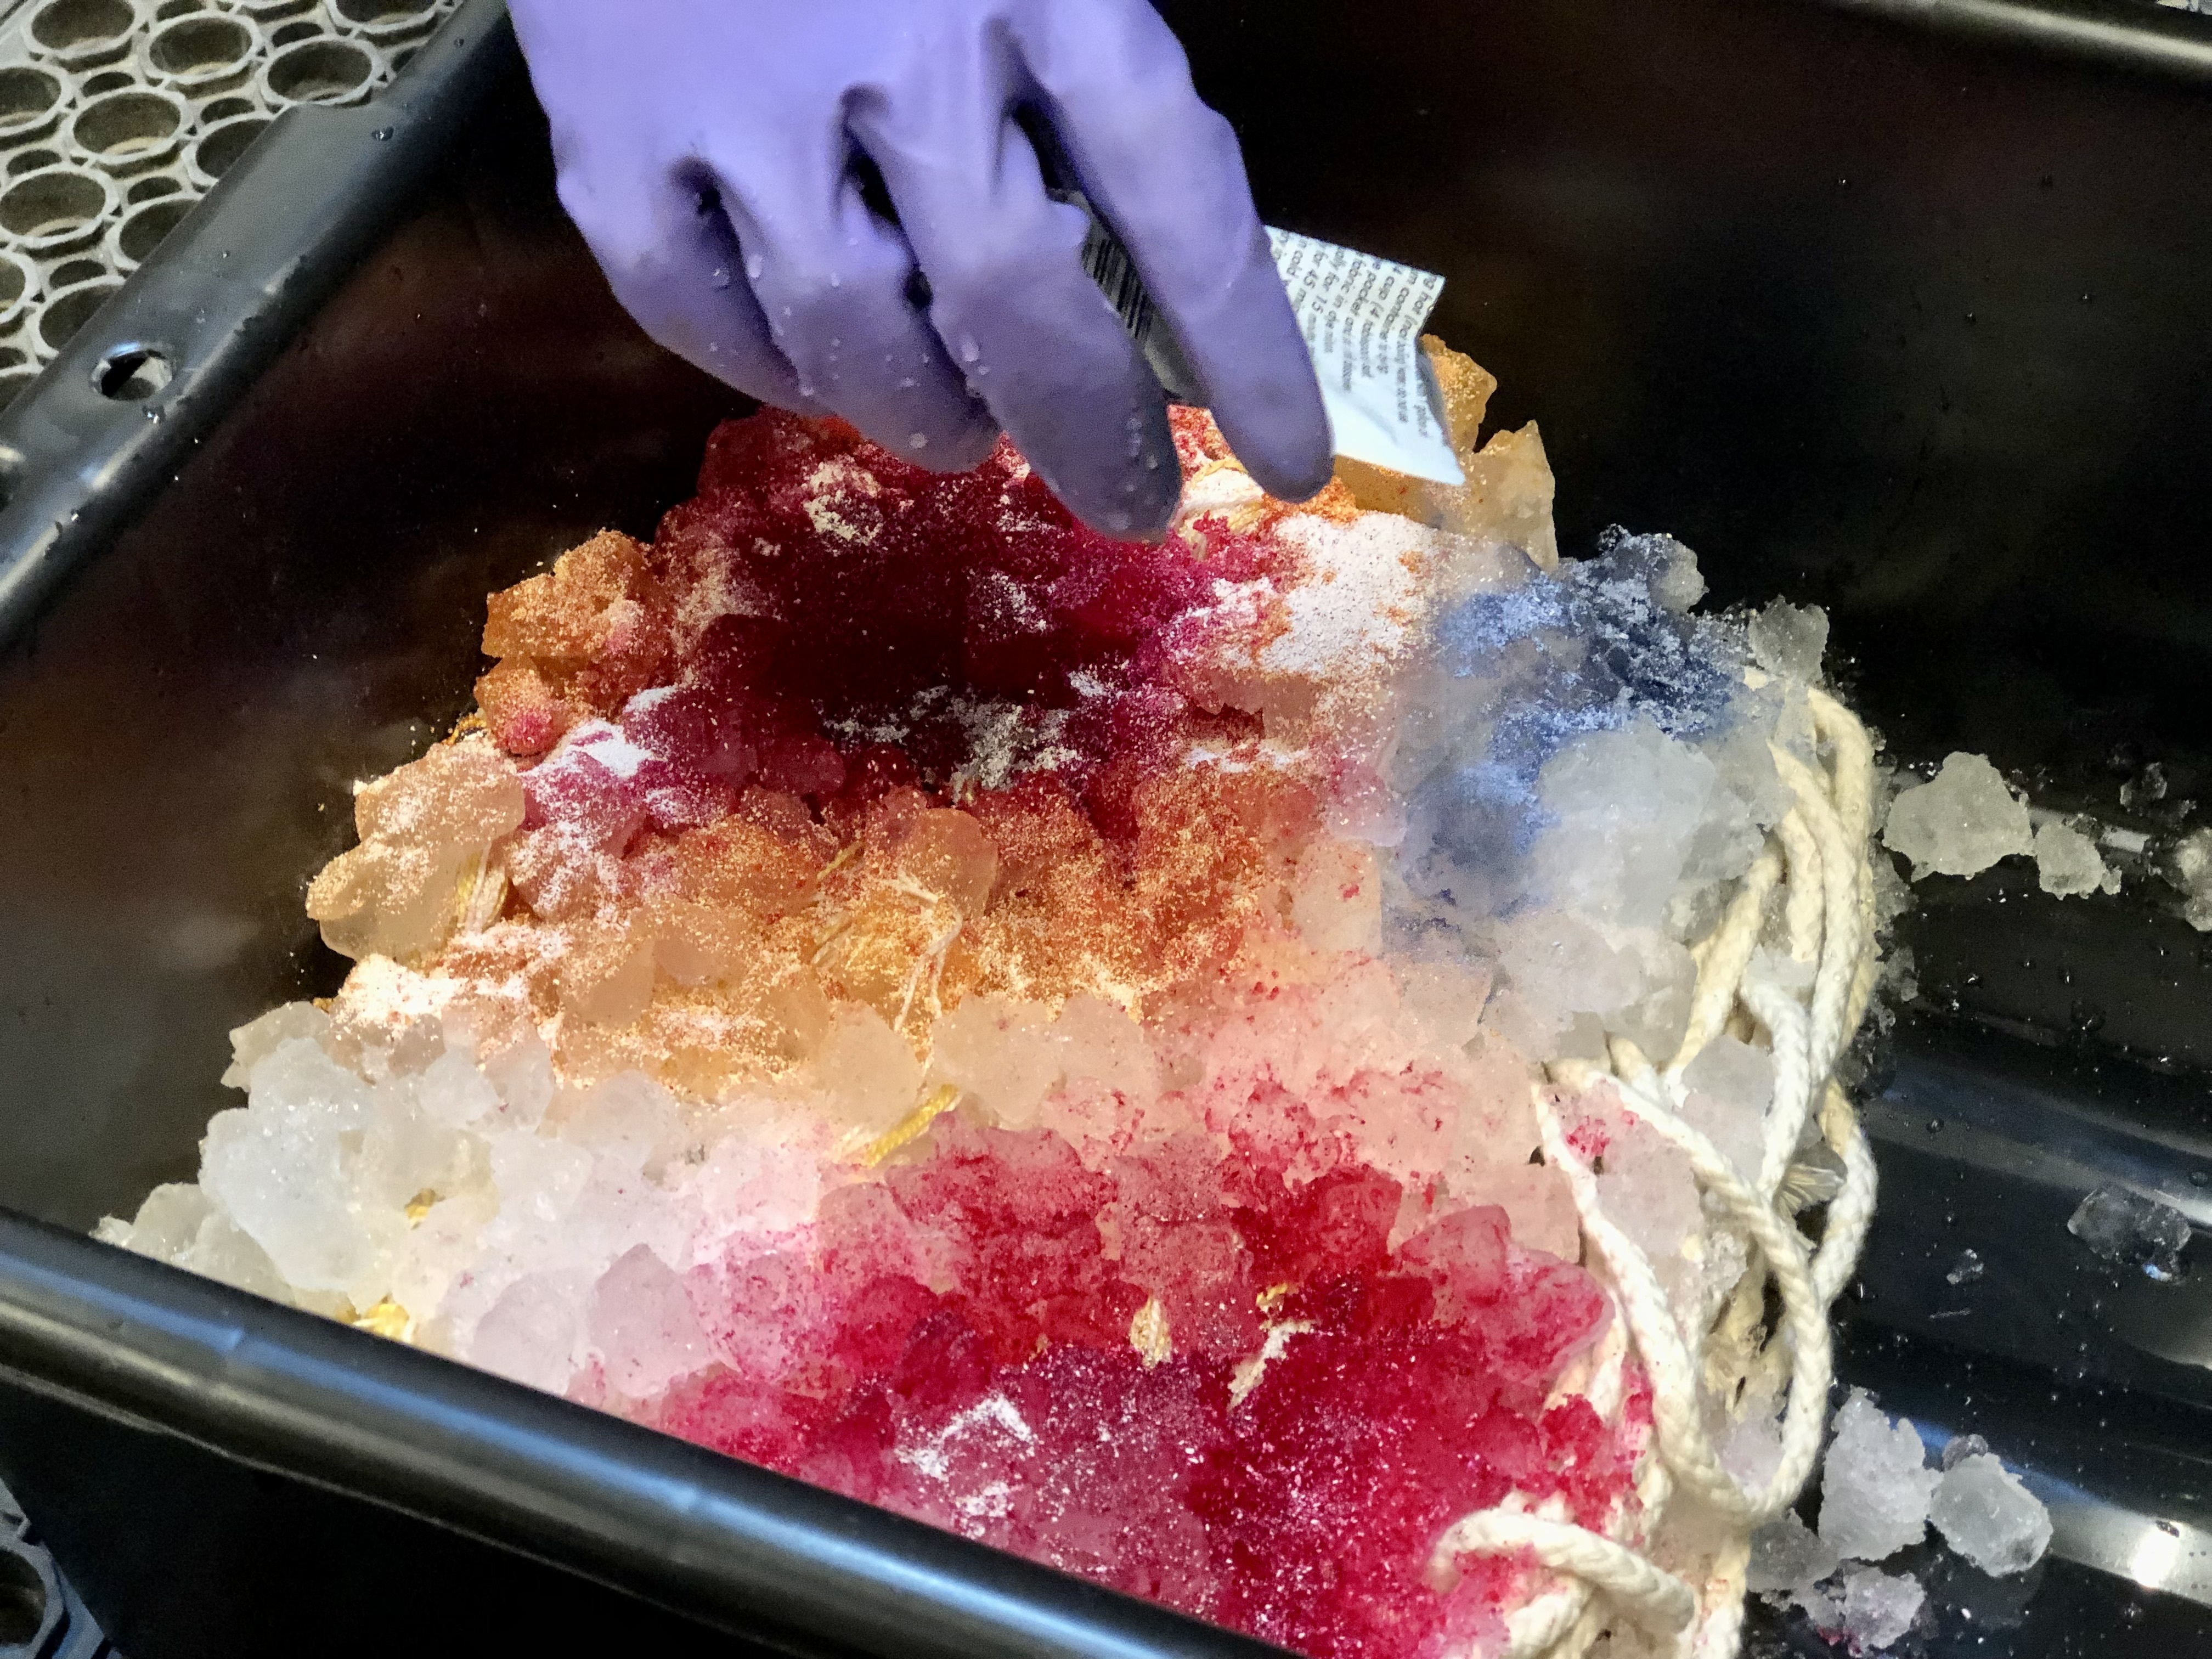 A purple, gloved hand is pouring packed, powder dye onto a large clump of ice sitting on top of fiber. There are bright red and orange and some blue sections of dye that is already soaking into the ice, creating vivid spots.